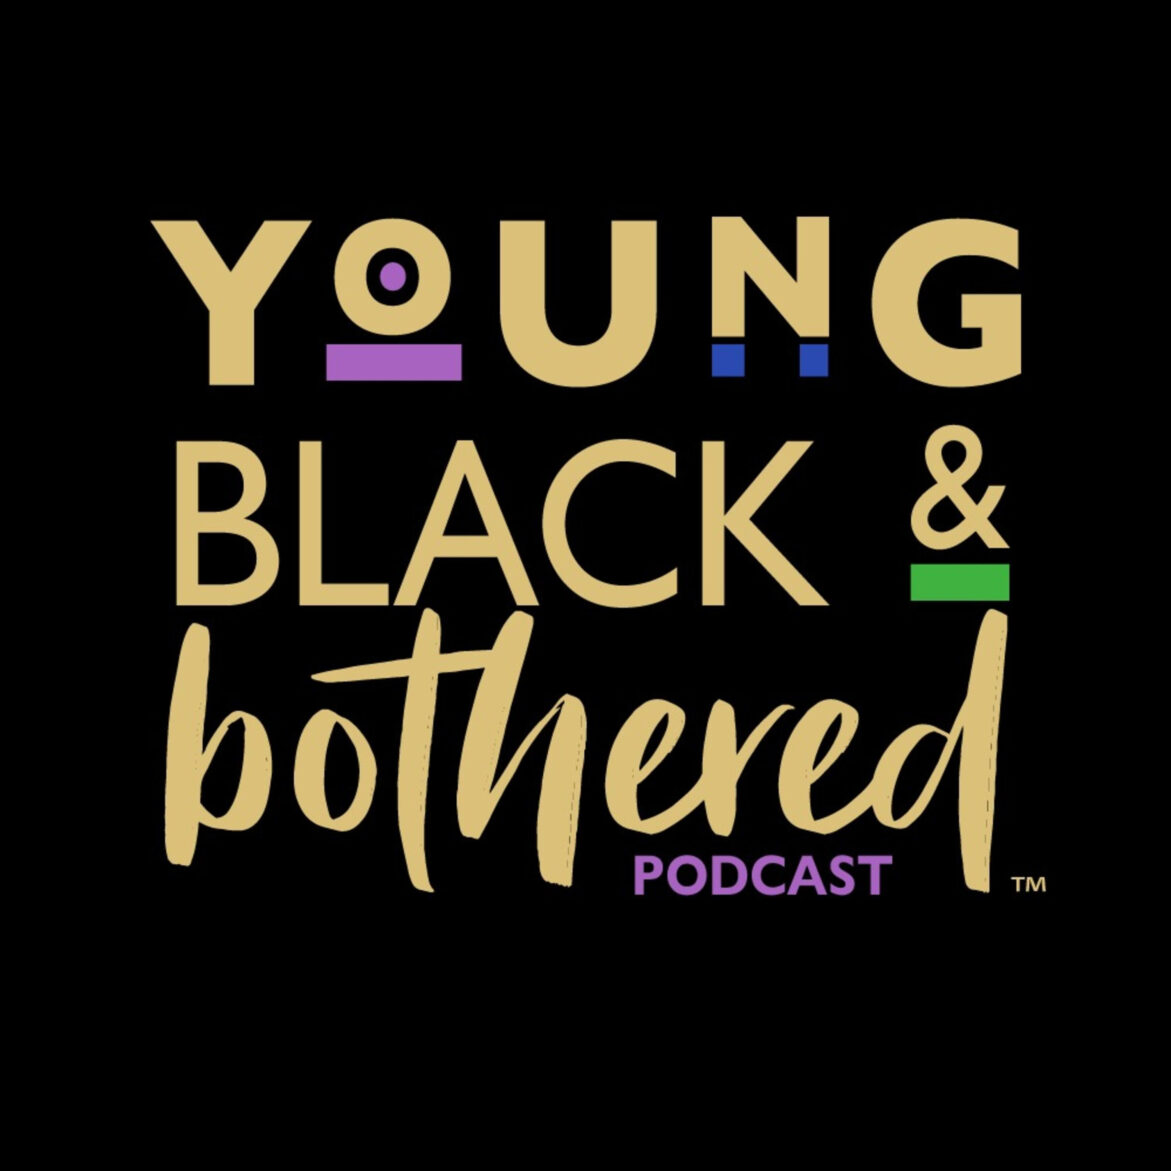 Black Podcasting - A Show For Mama: Happy Mother's Day